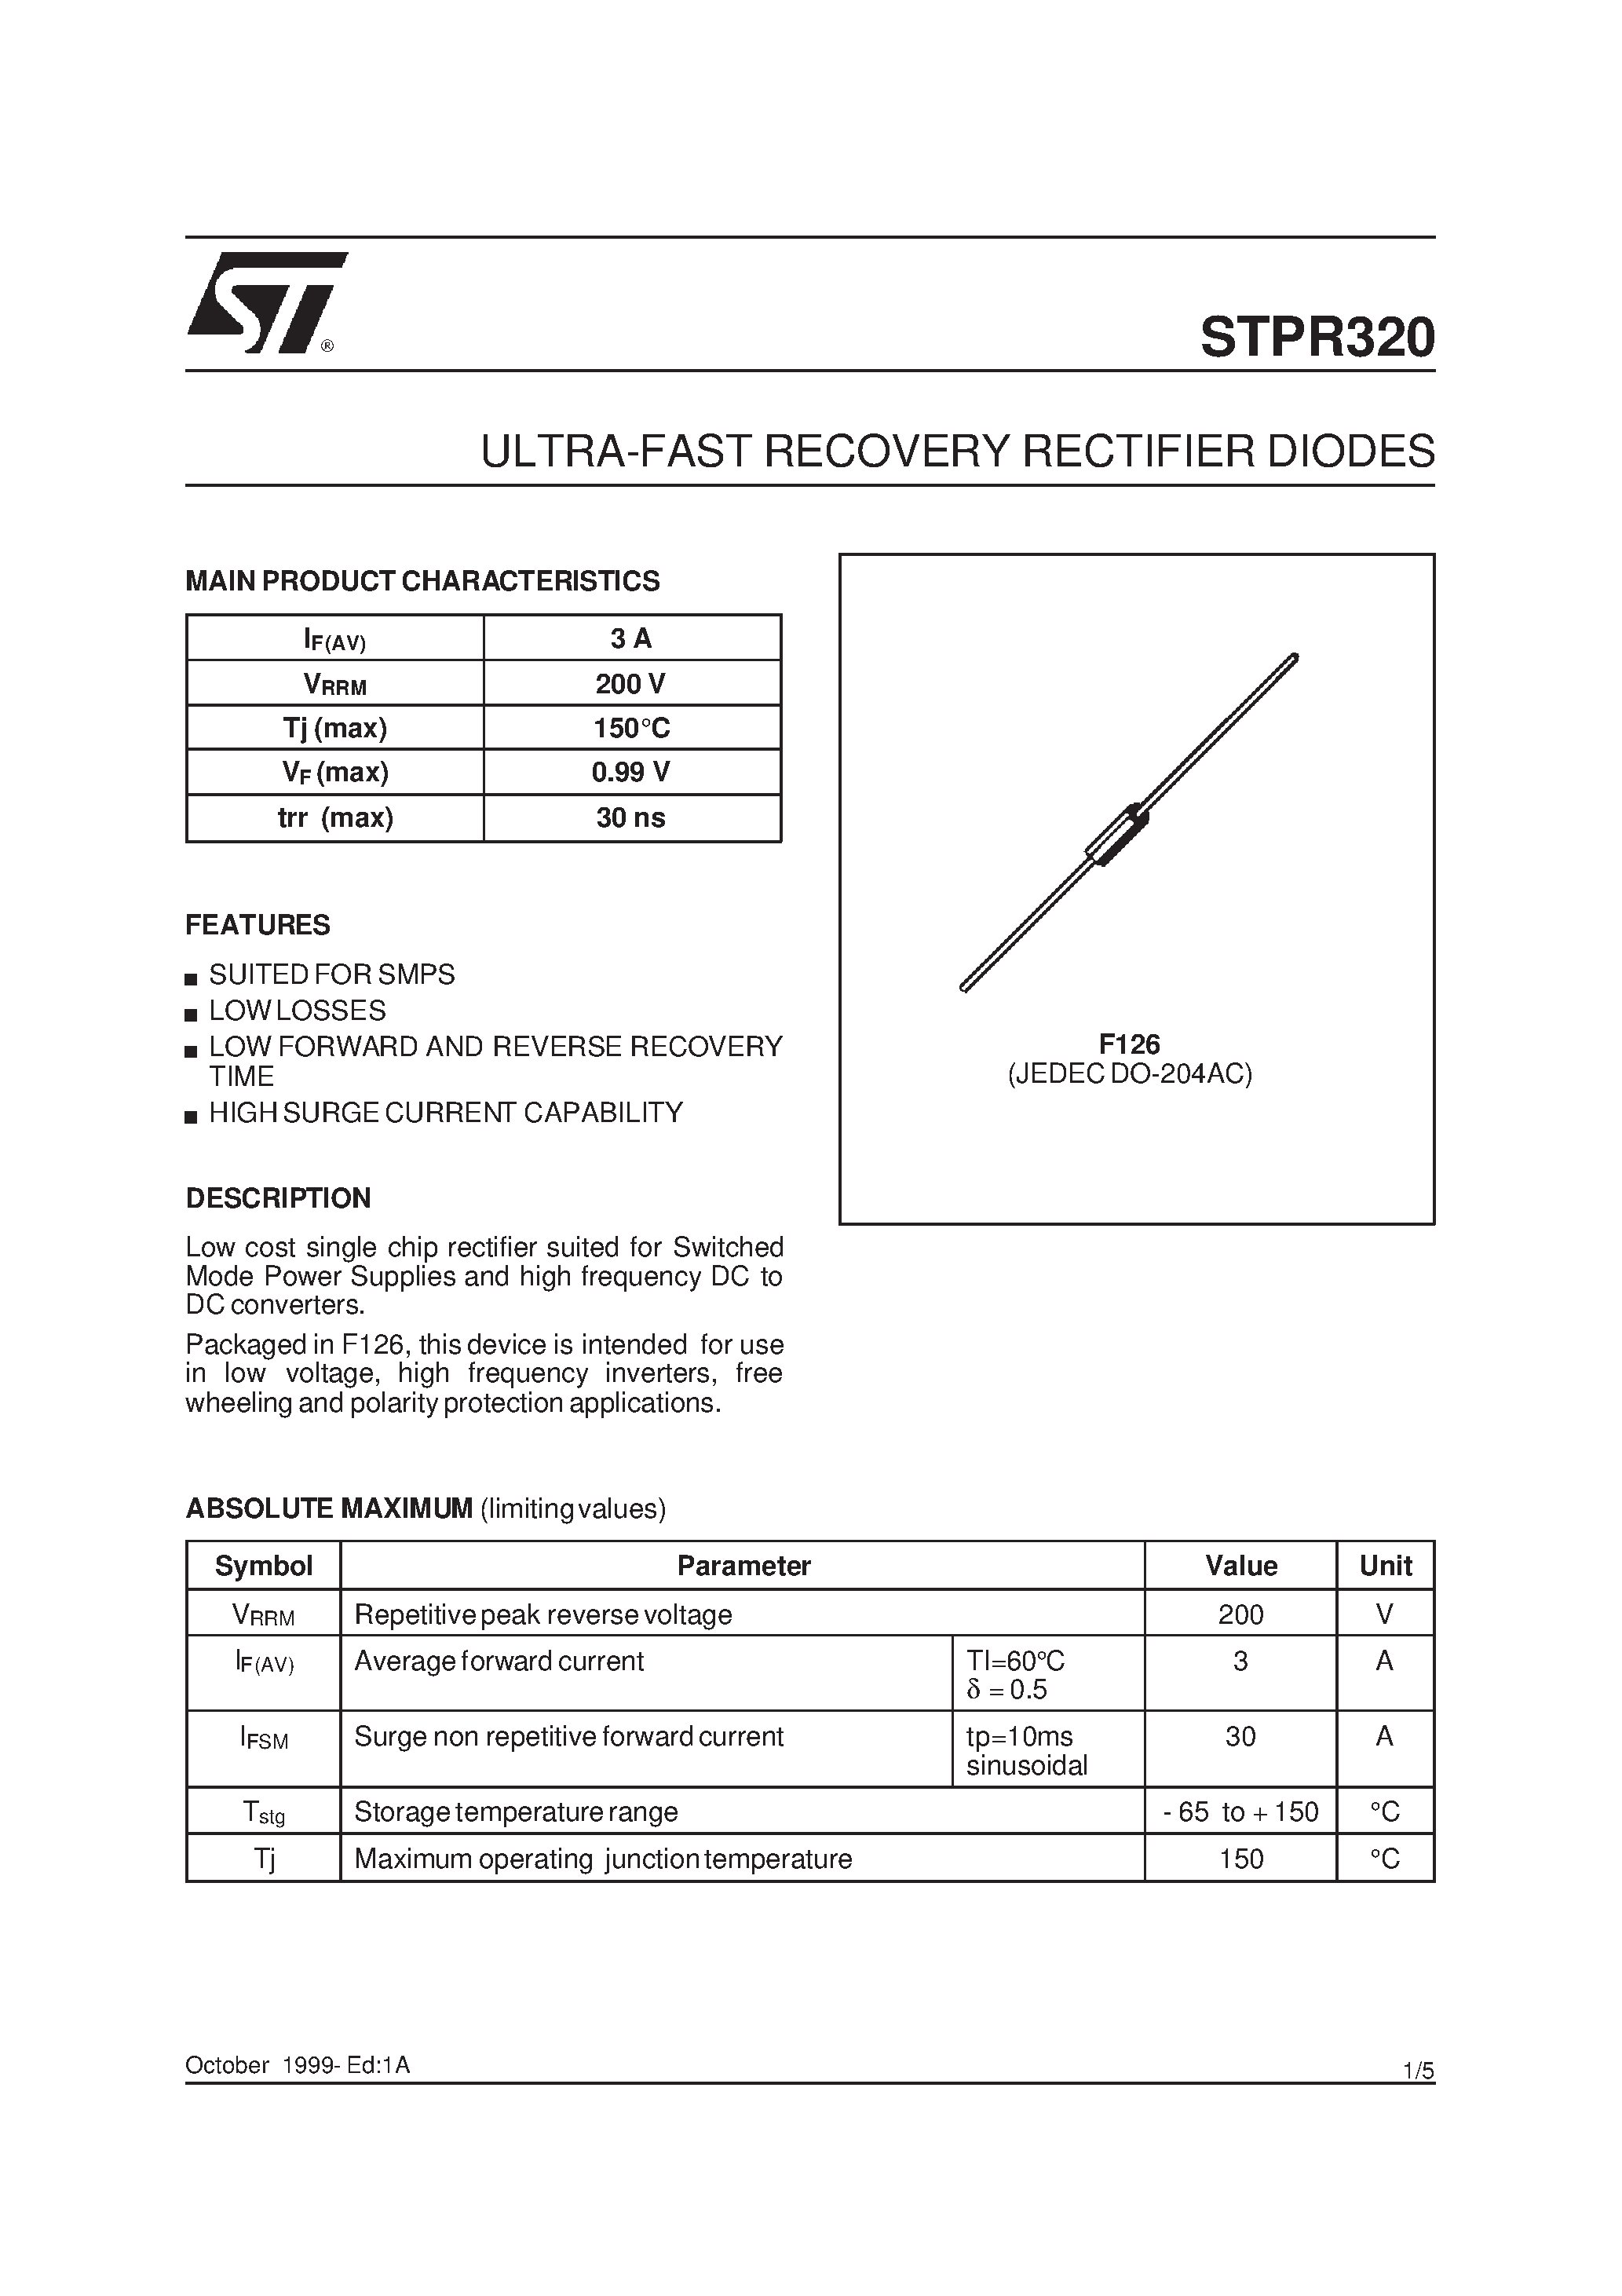 Datasheet STPR320 - ULTRA-FAST RECOVERY RECTIFIER DIODES page 1